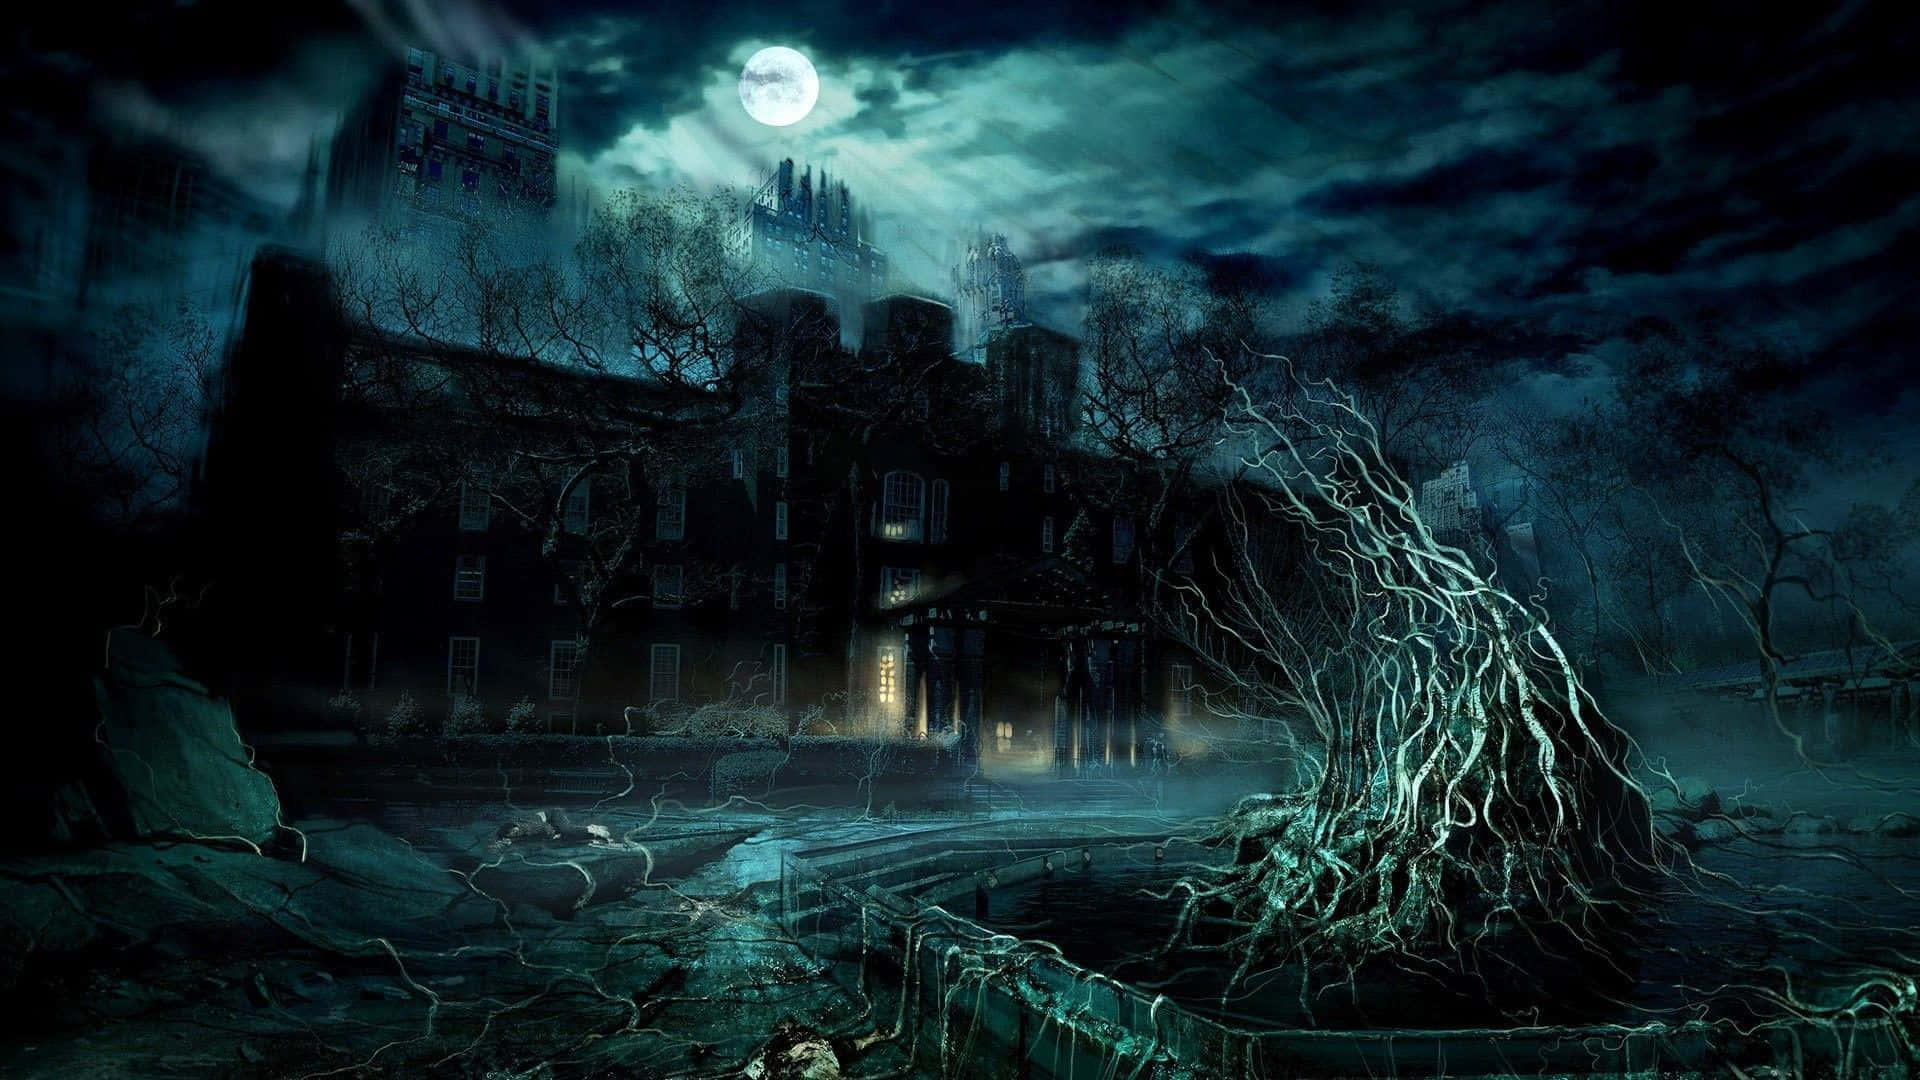 A Dark Night Scene With A Tree And A Castle Wallpaper